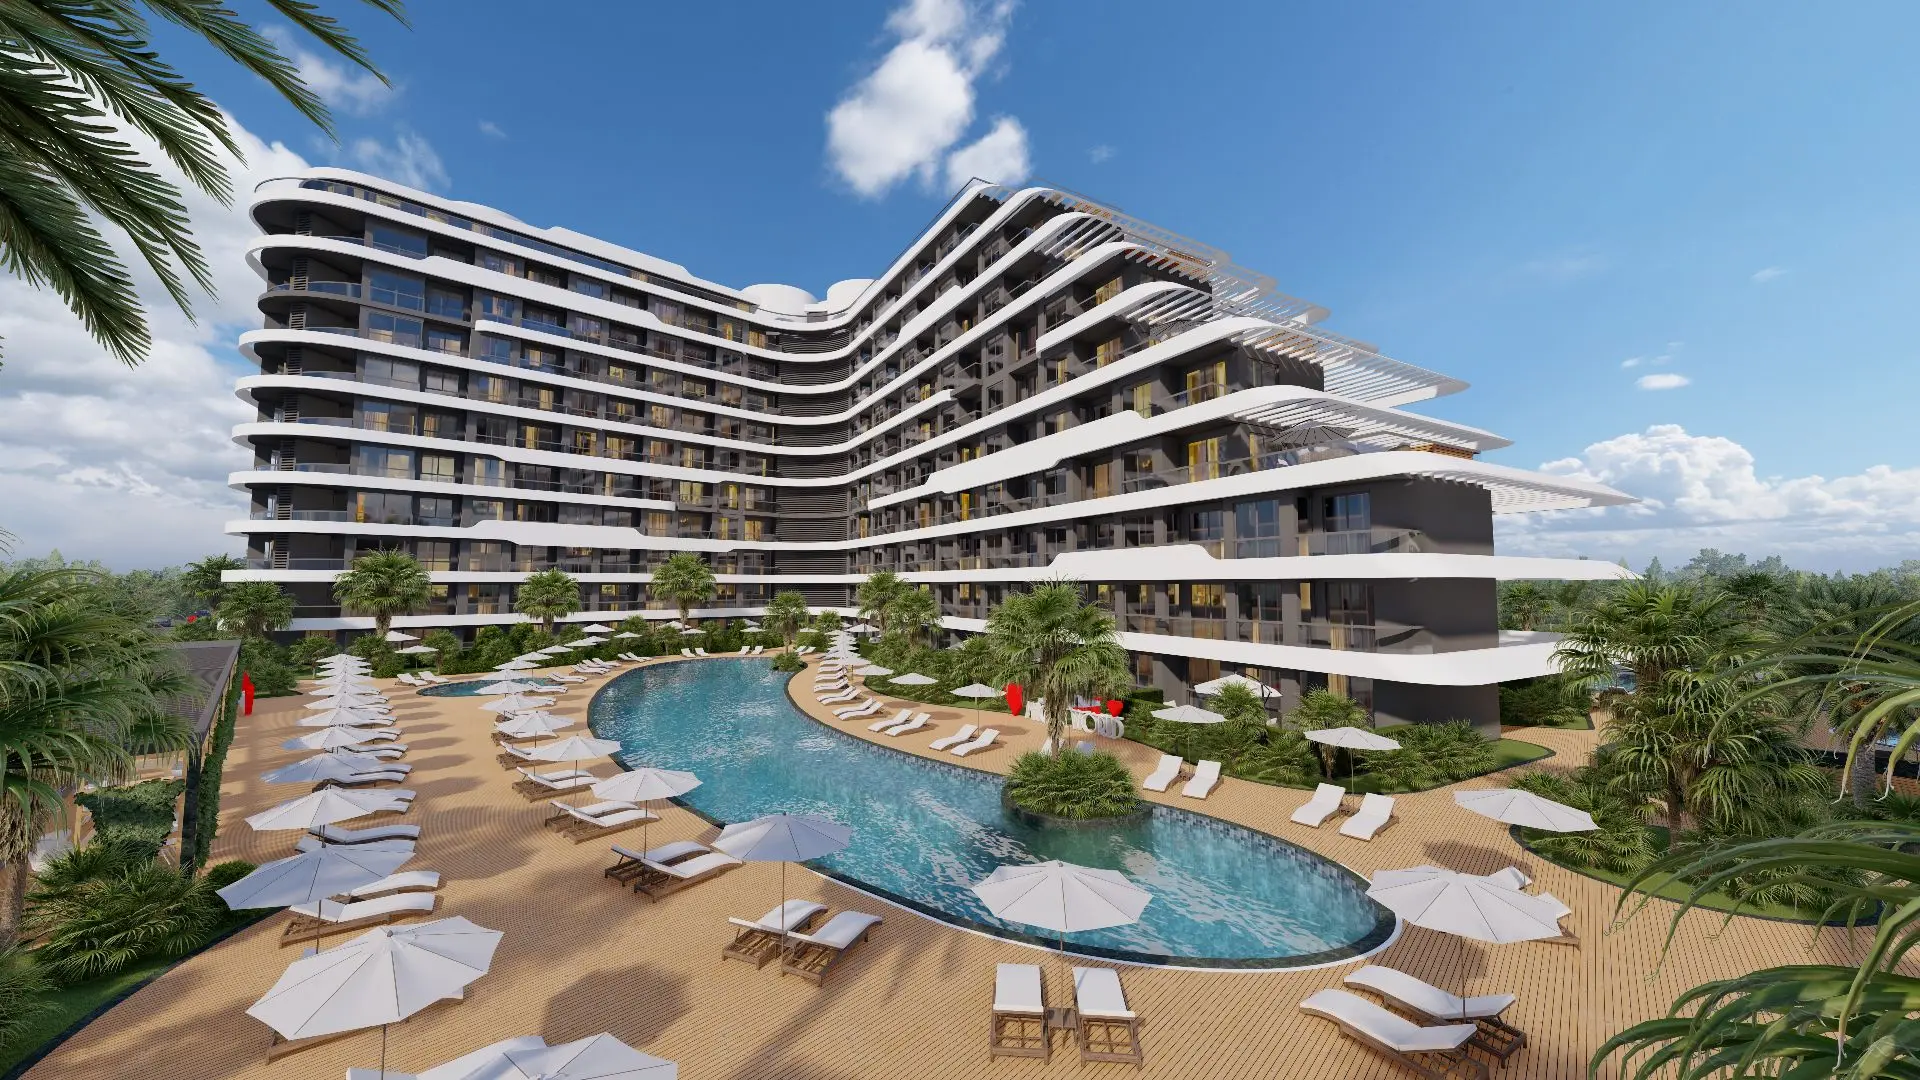 AMAZING NEW HOUSING PROJECT IN ANTALYA